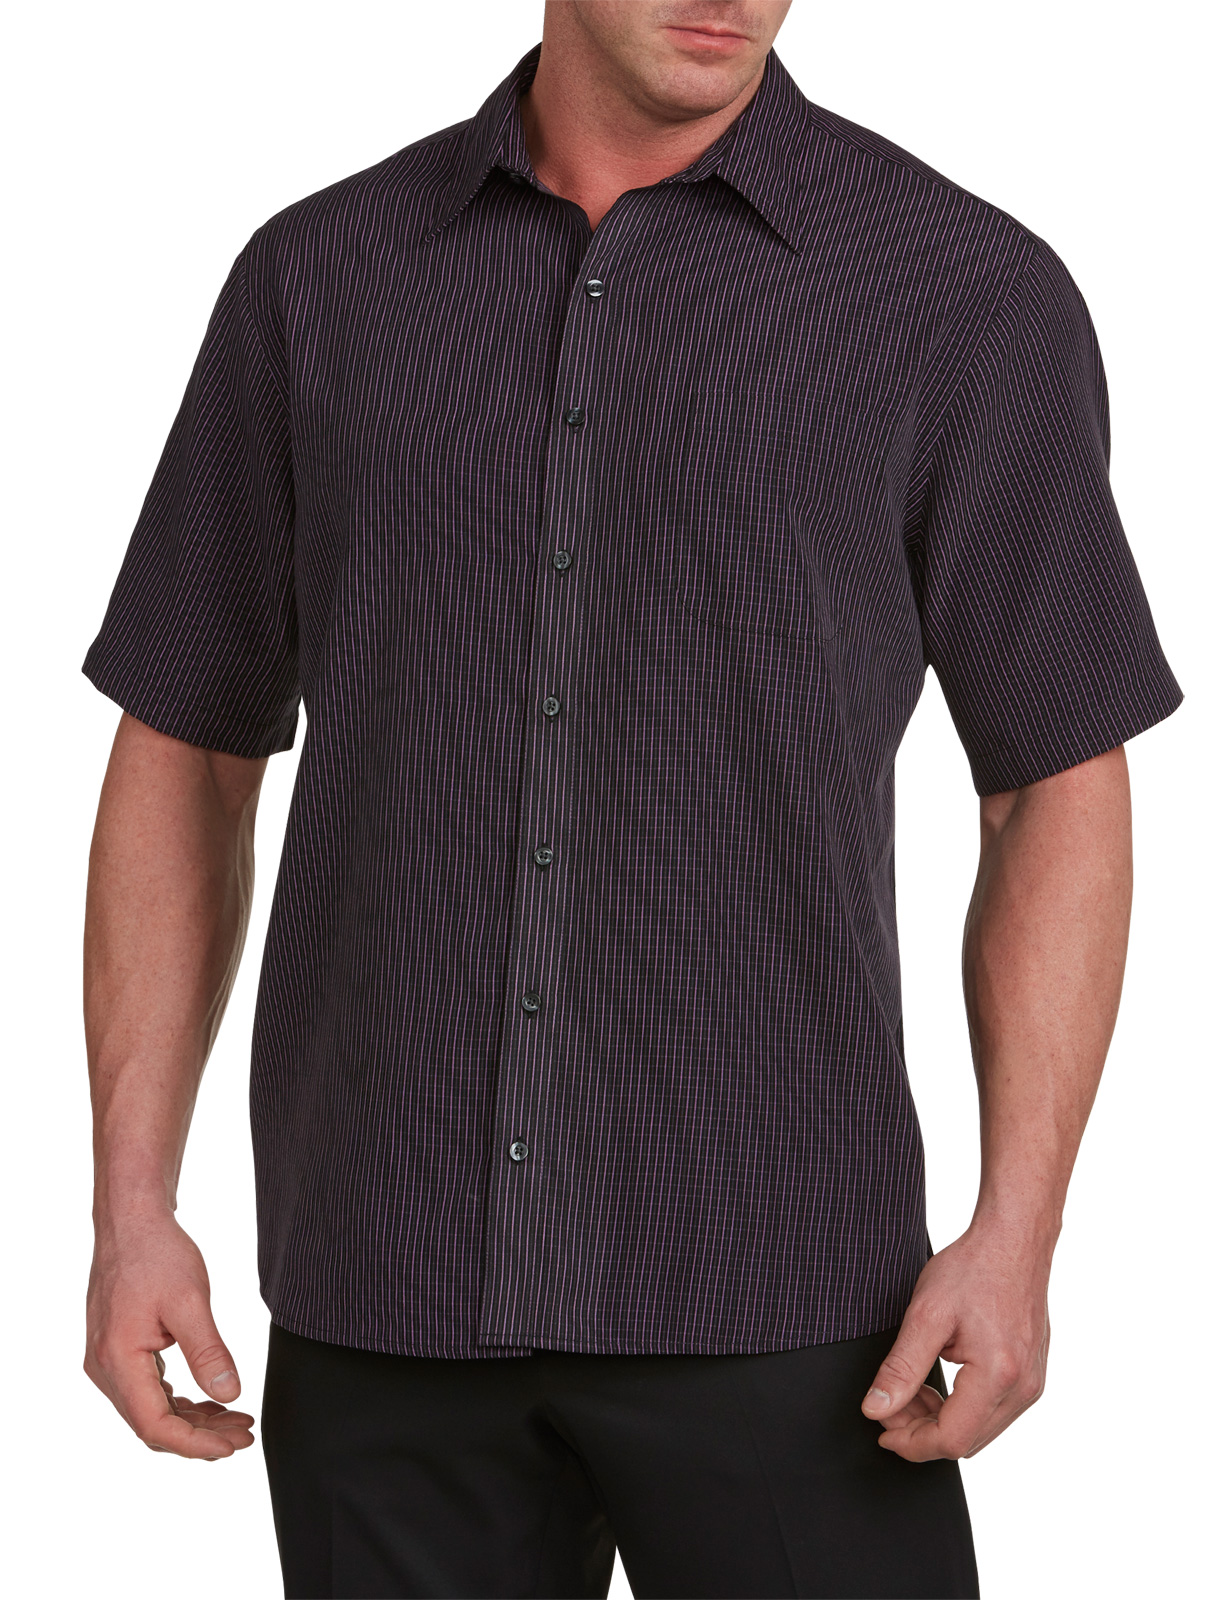 Synrgy Men's Big and Tall Stripe Microfiber Sport Shirt